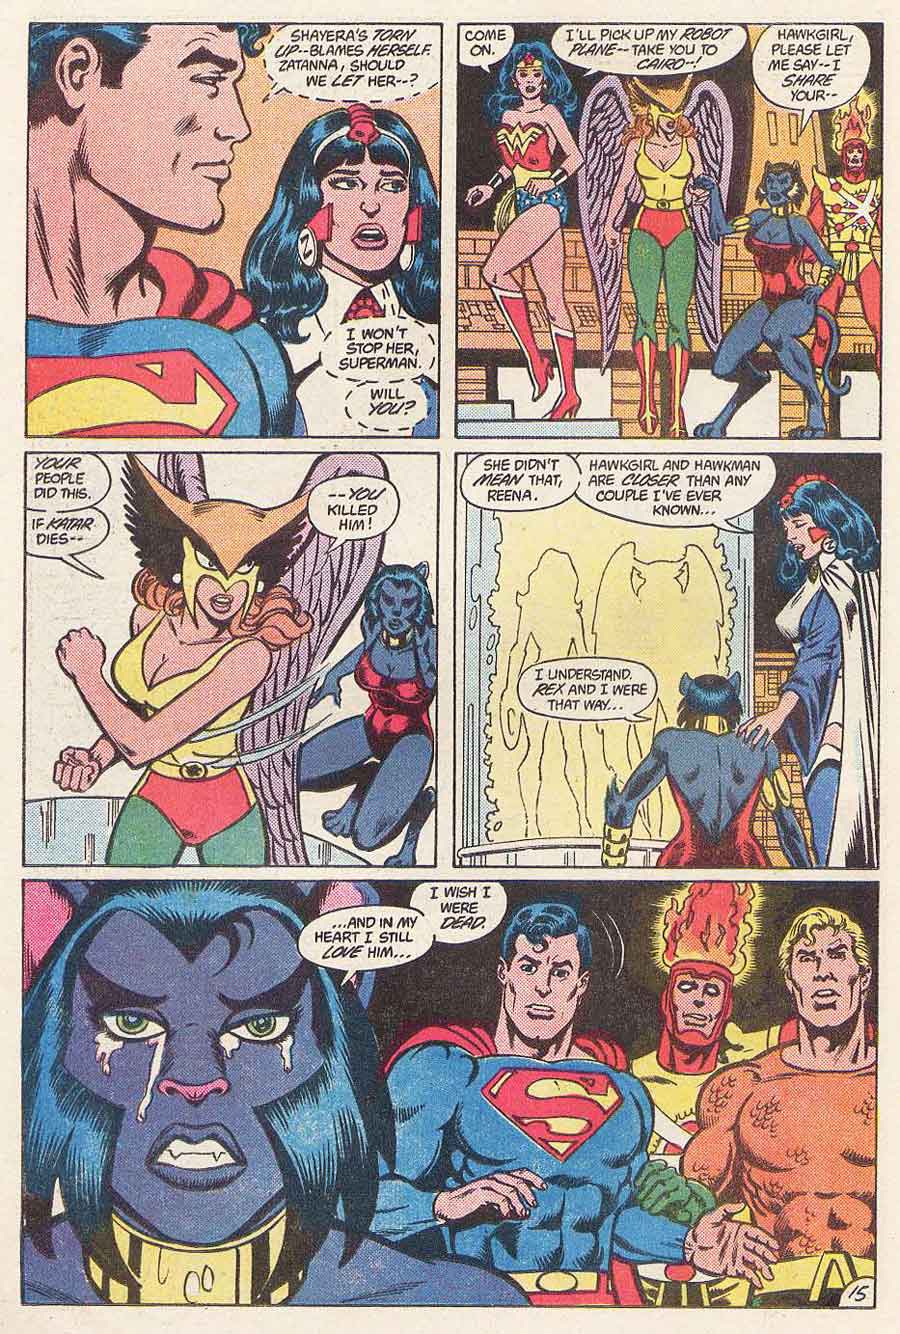 Justice League of America #222 by Gerry Conway, Chuck Patton and Romeo Tanghal